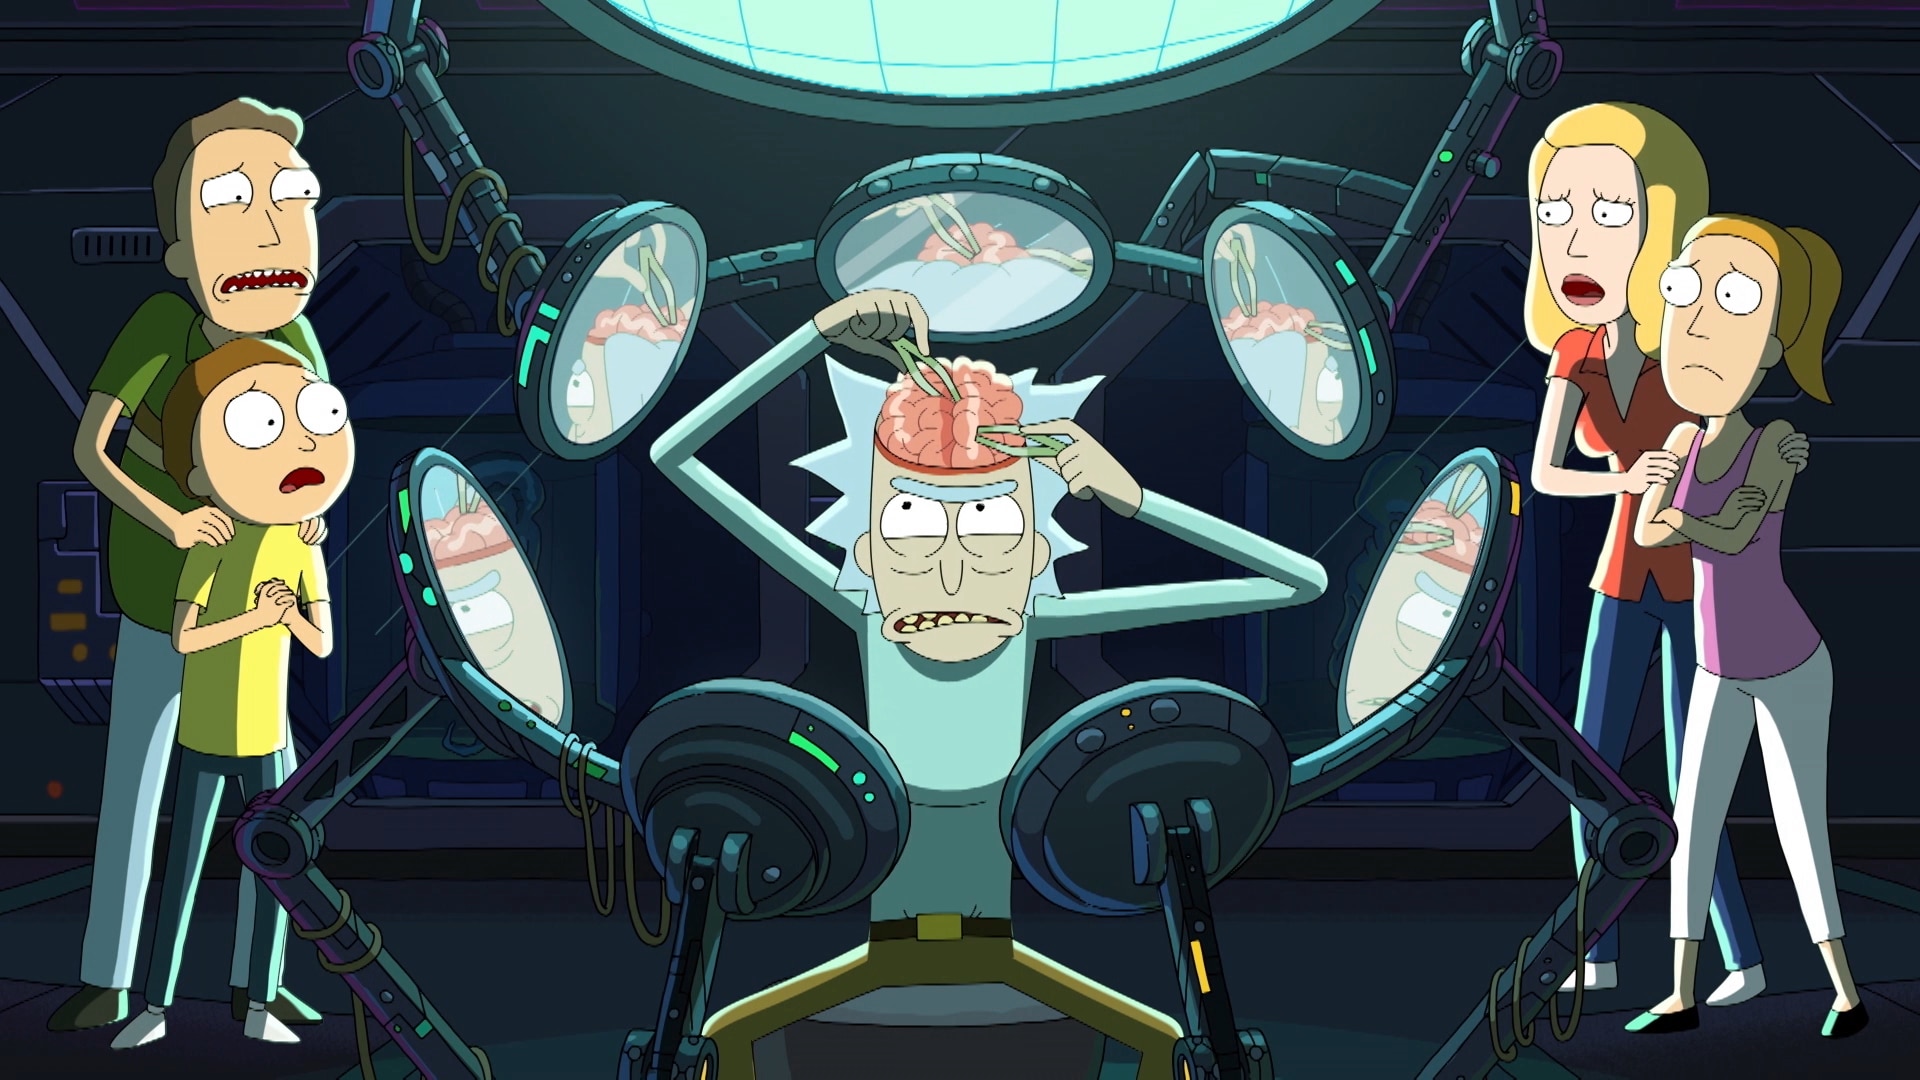 Rick And Morty Season 5 Episode 5: Release Date, Time, How to Watch - Where To Watch Rick And Morty Season 5 Free